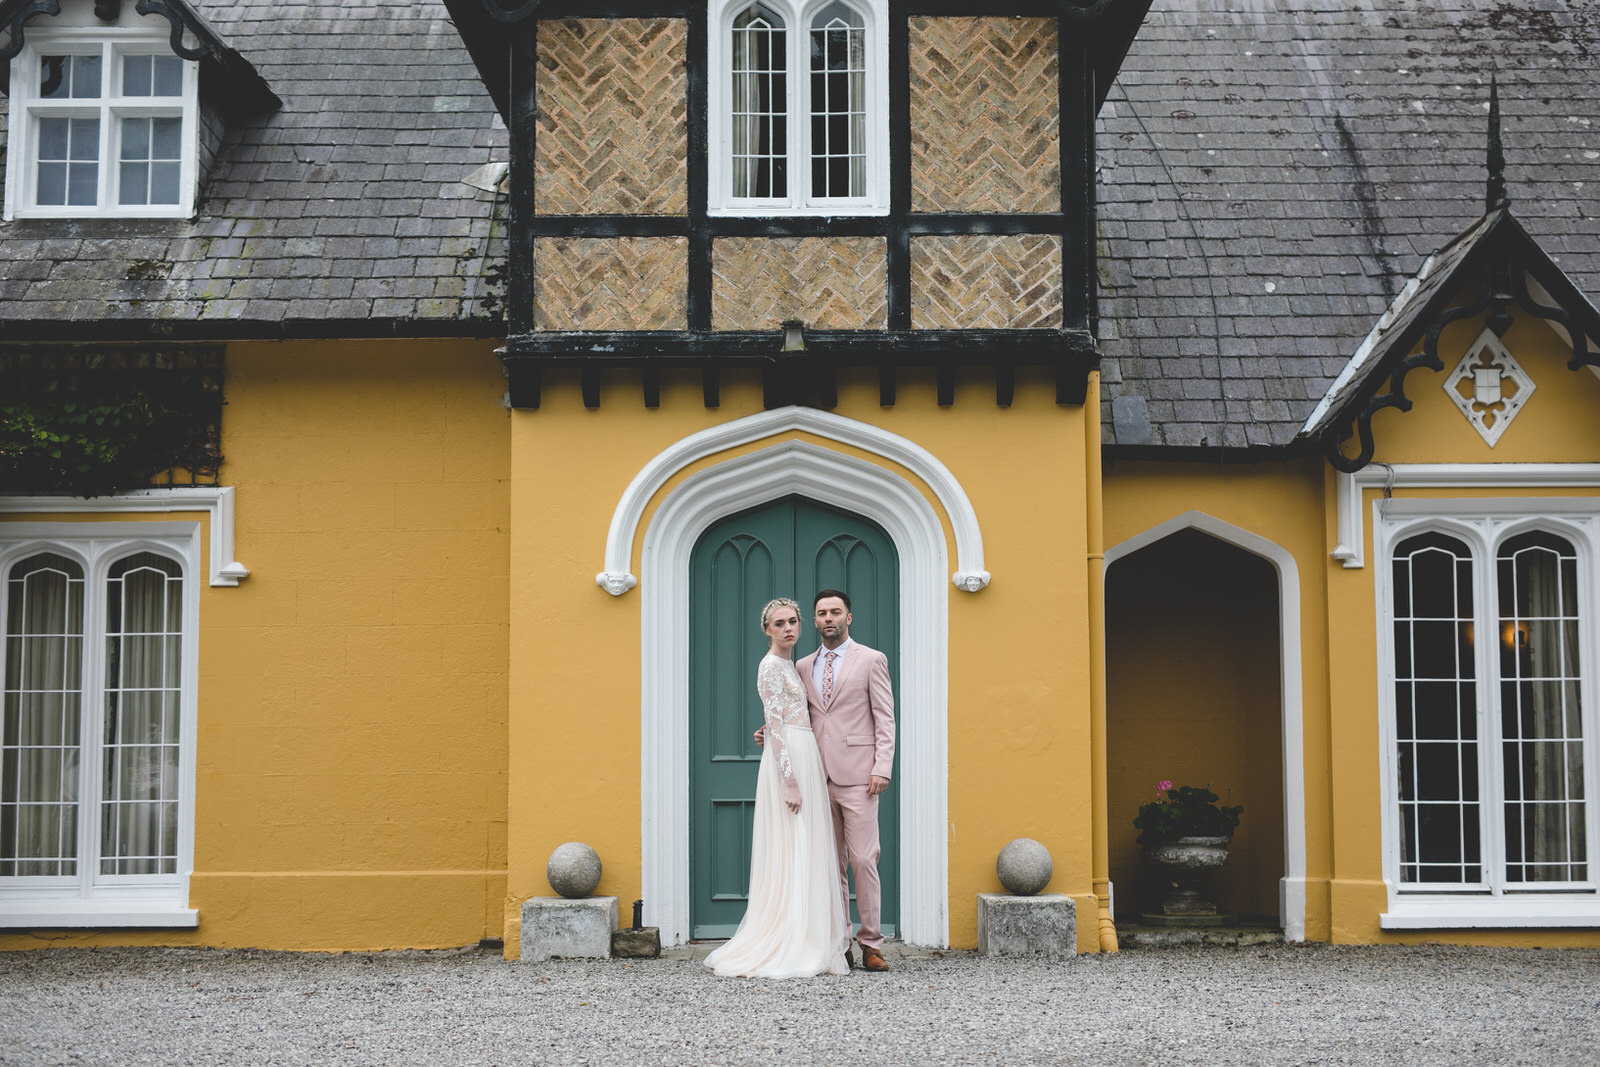 Styled wedding shoot at Martinstown House Kildare